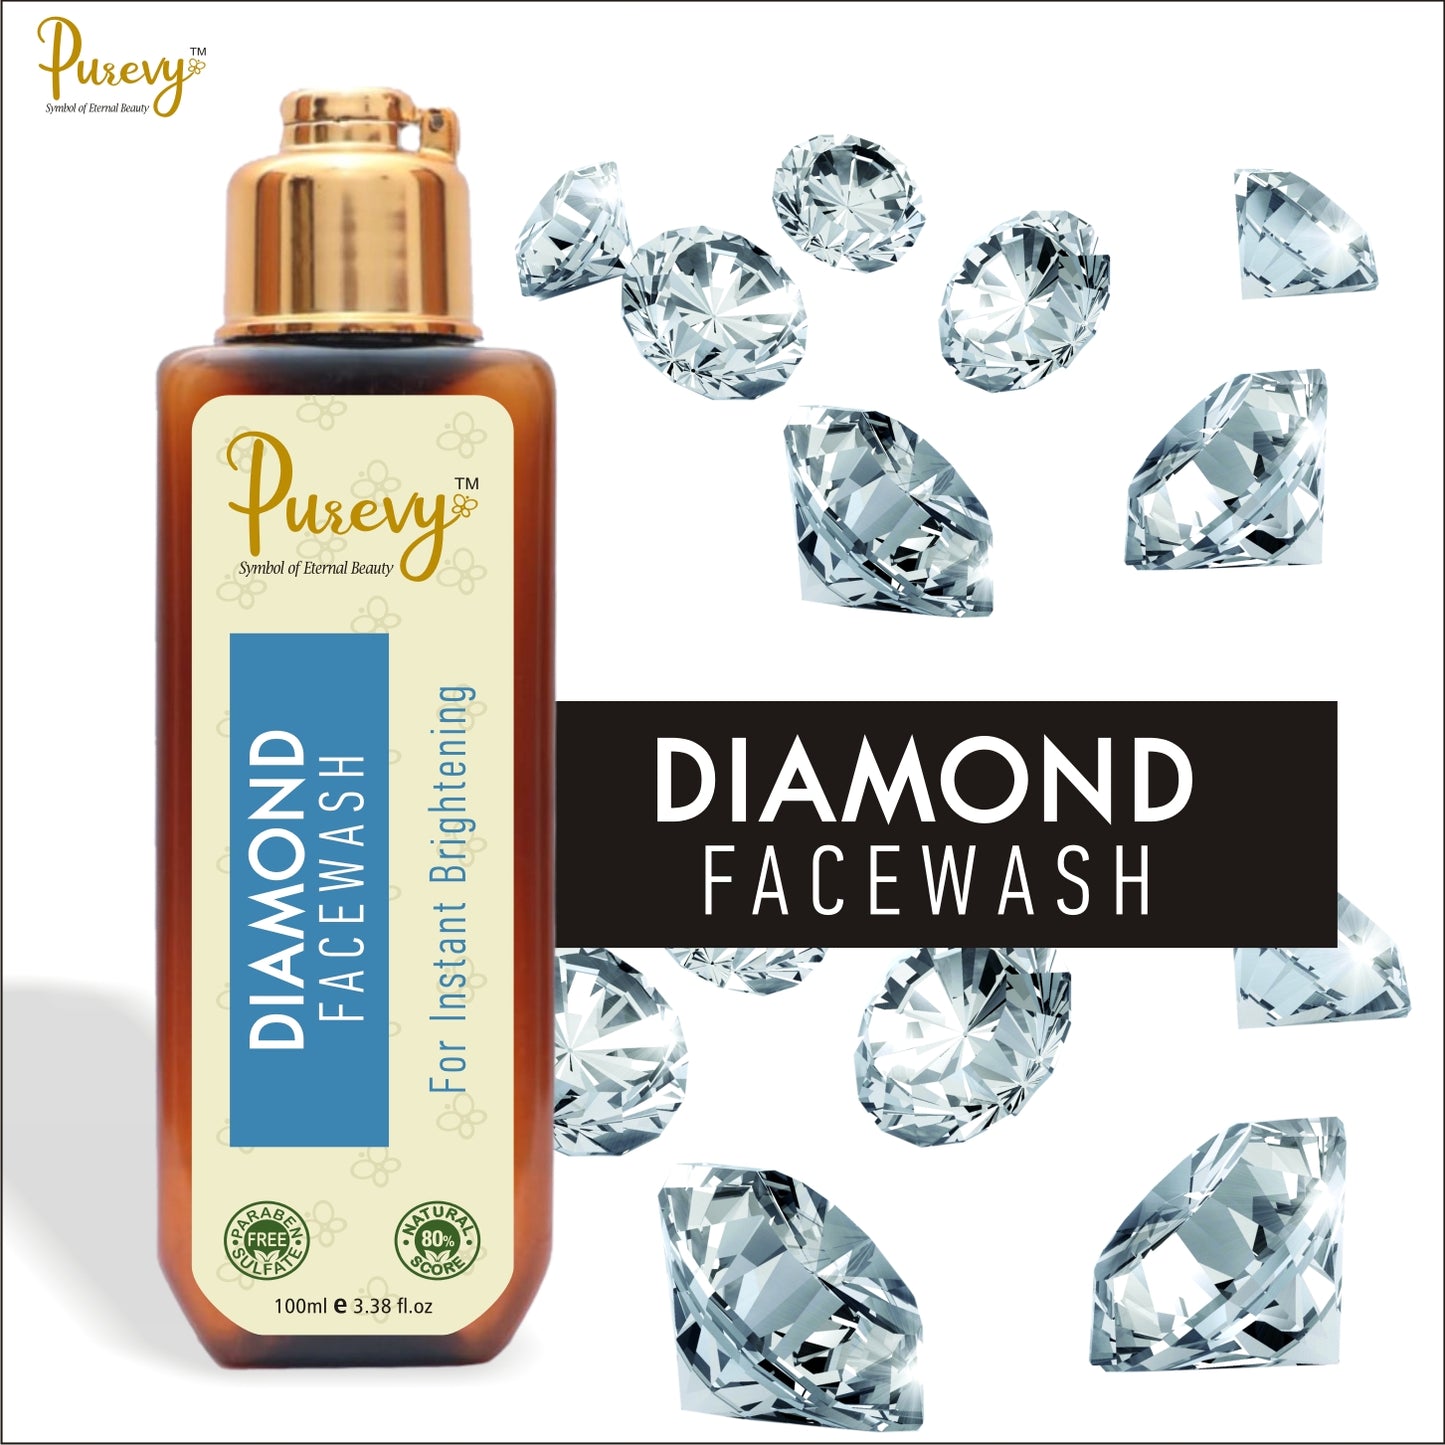 Purevy Diamond Face wash removes deep-sited dirt, oil & exfoliates dead cell leaving skin looking young & radiant. 100ml